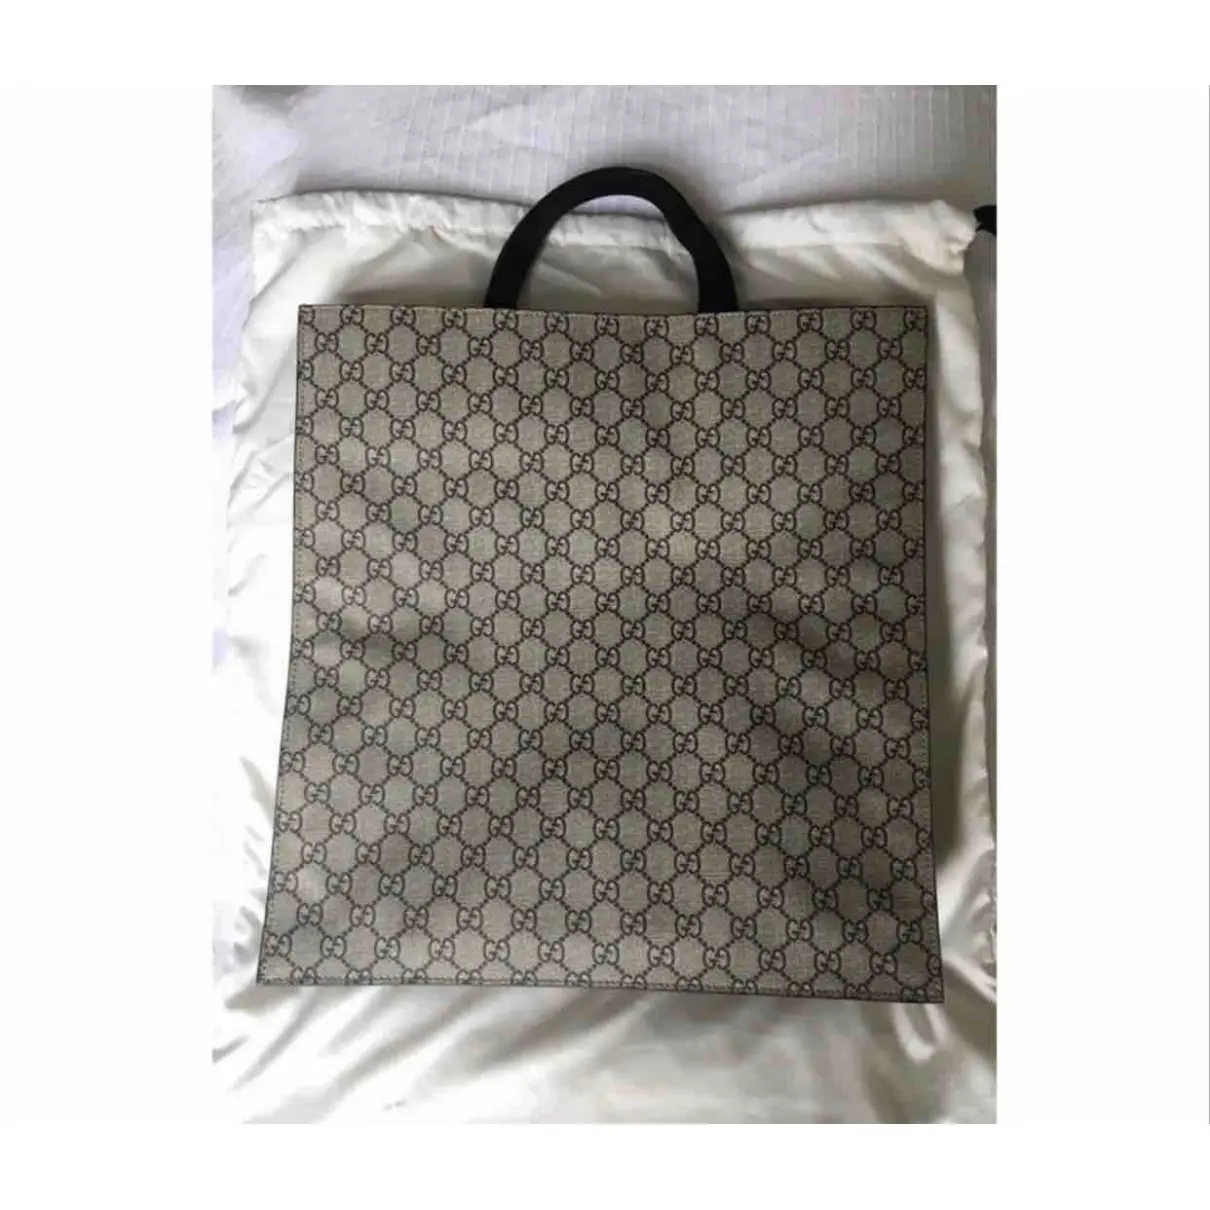 Buy Gucci Bestiary tote cloth tote online